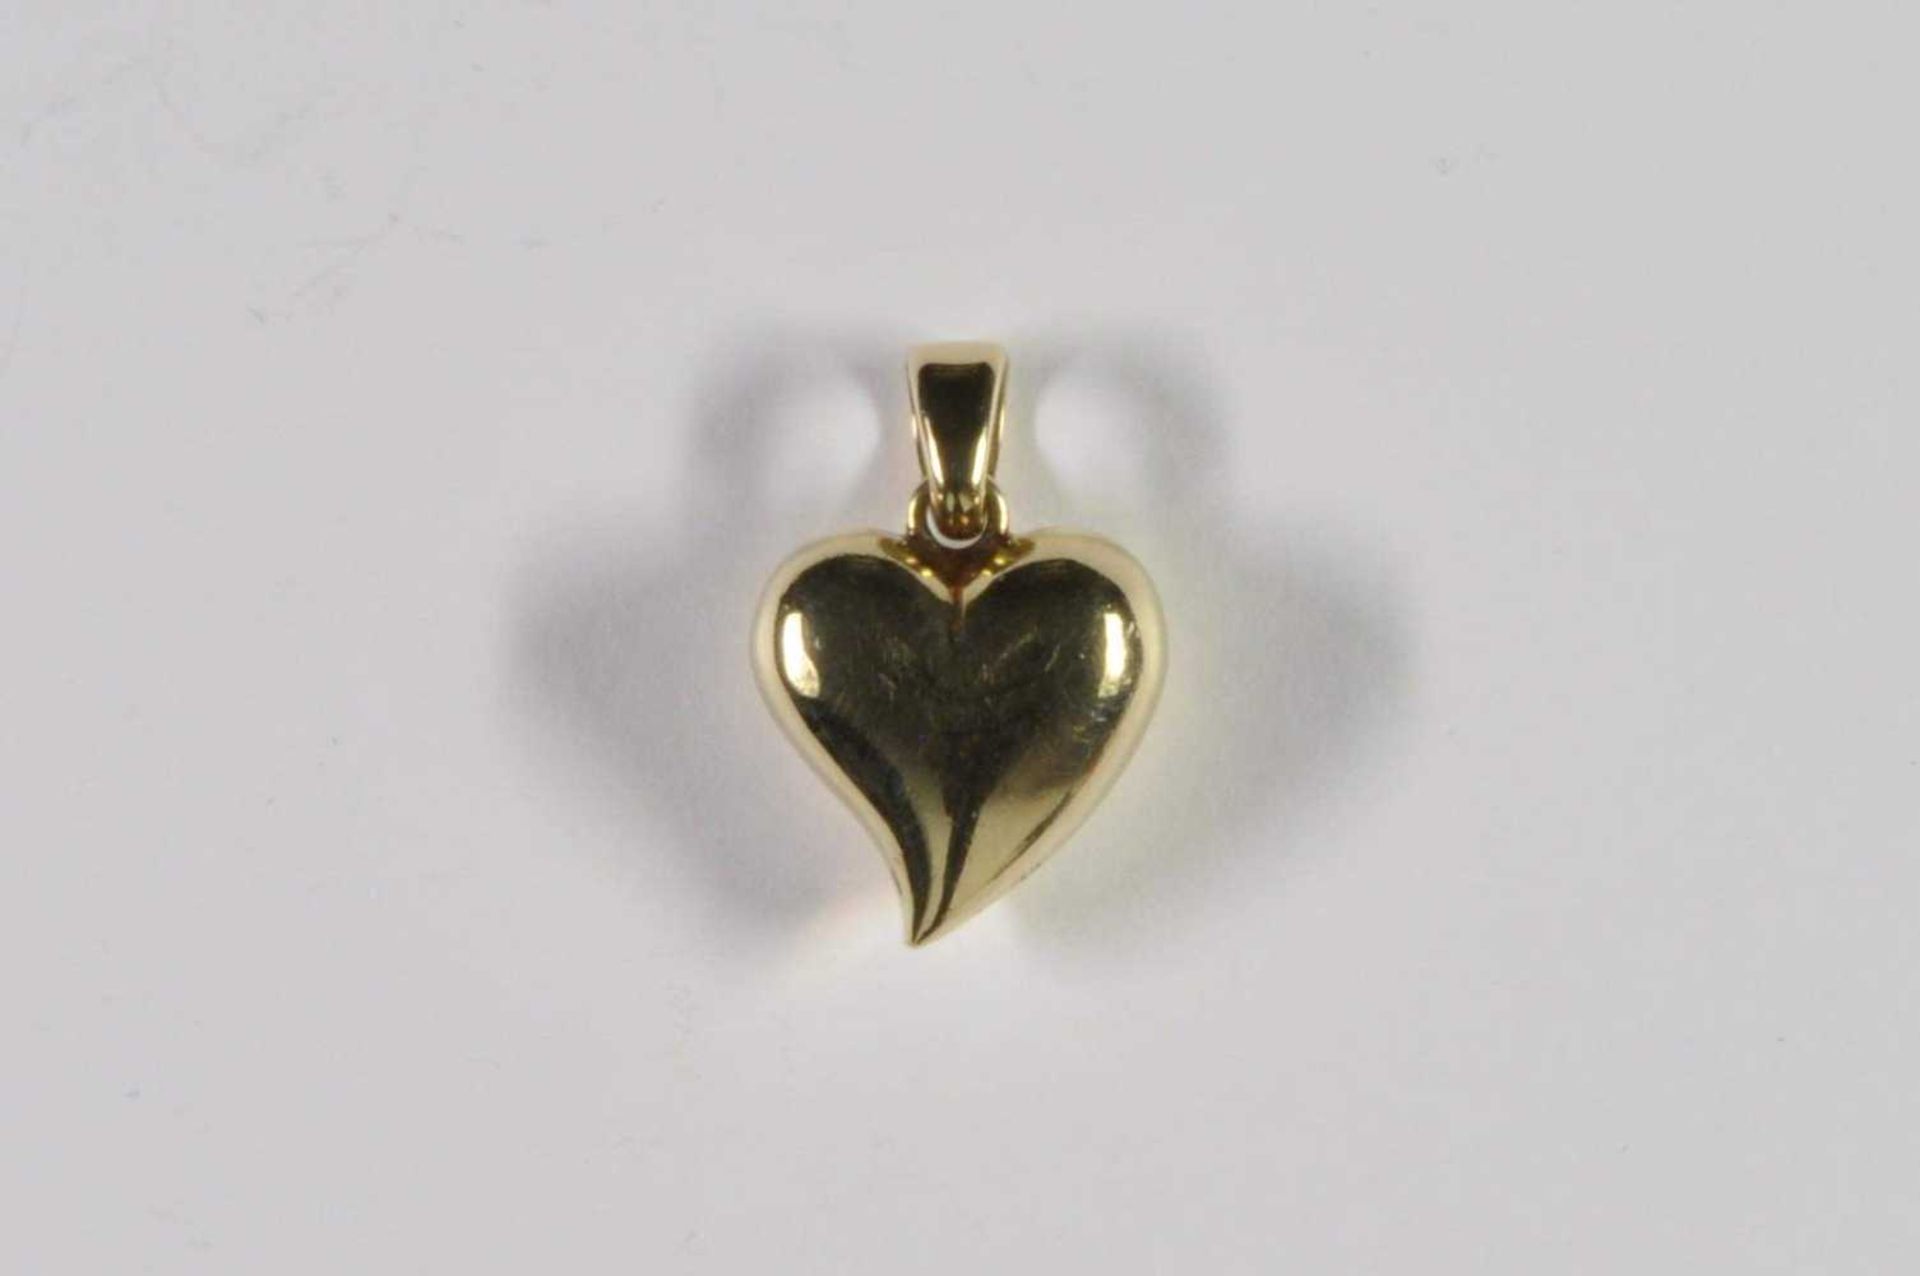 Brillant pendant in the shape of a heart, 585 yellow gold, 5, 25 g, 14, 5 x 21, 1 x 7, 3 mm (with ey - Image 3 of 7